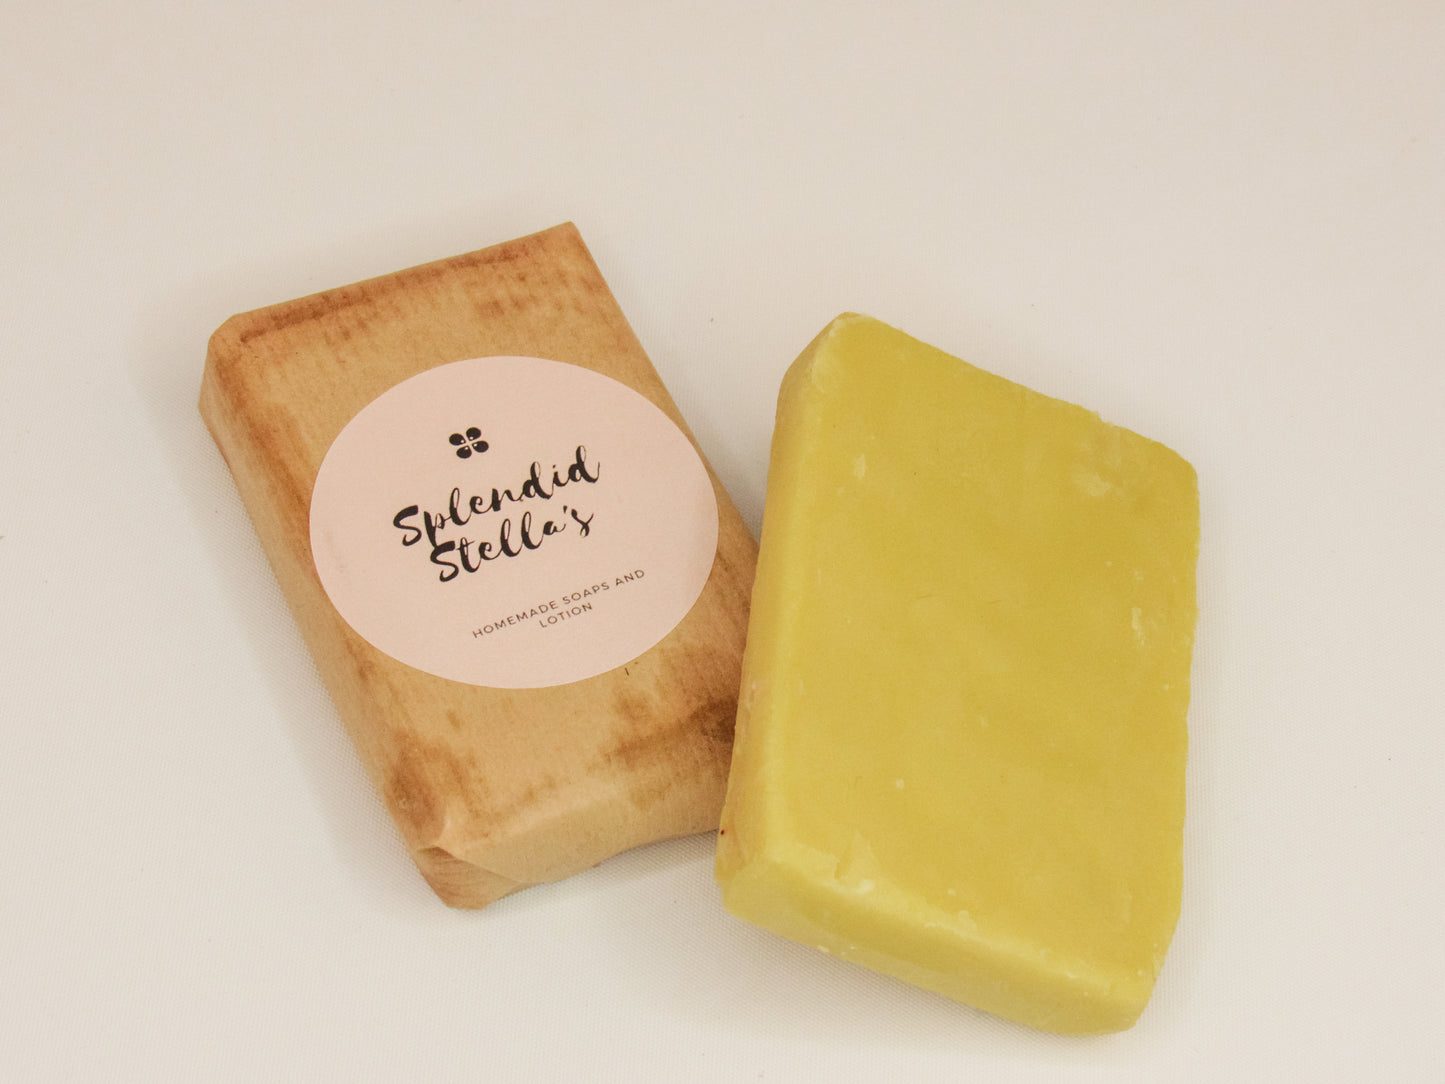 Shea and Almond Oil Lotion Bar